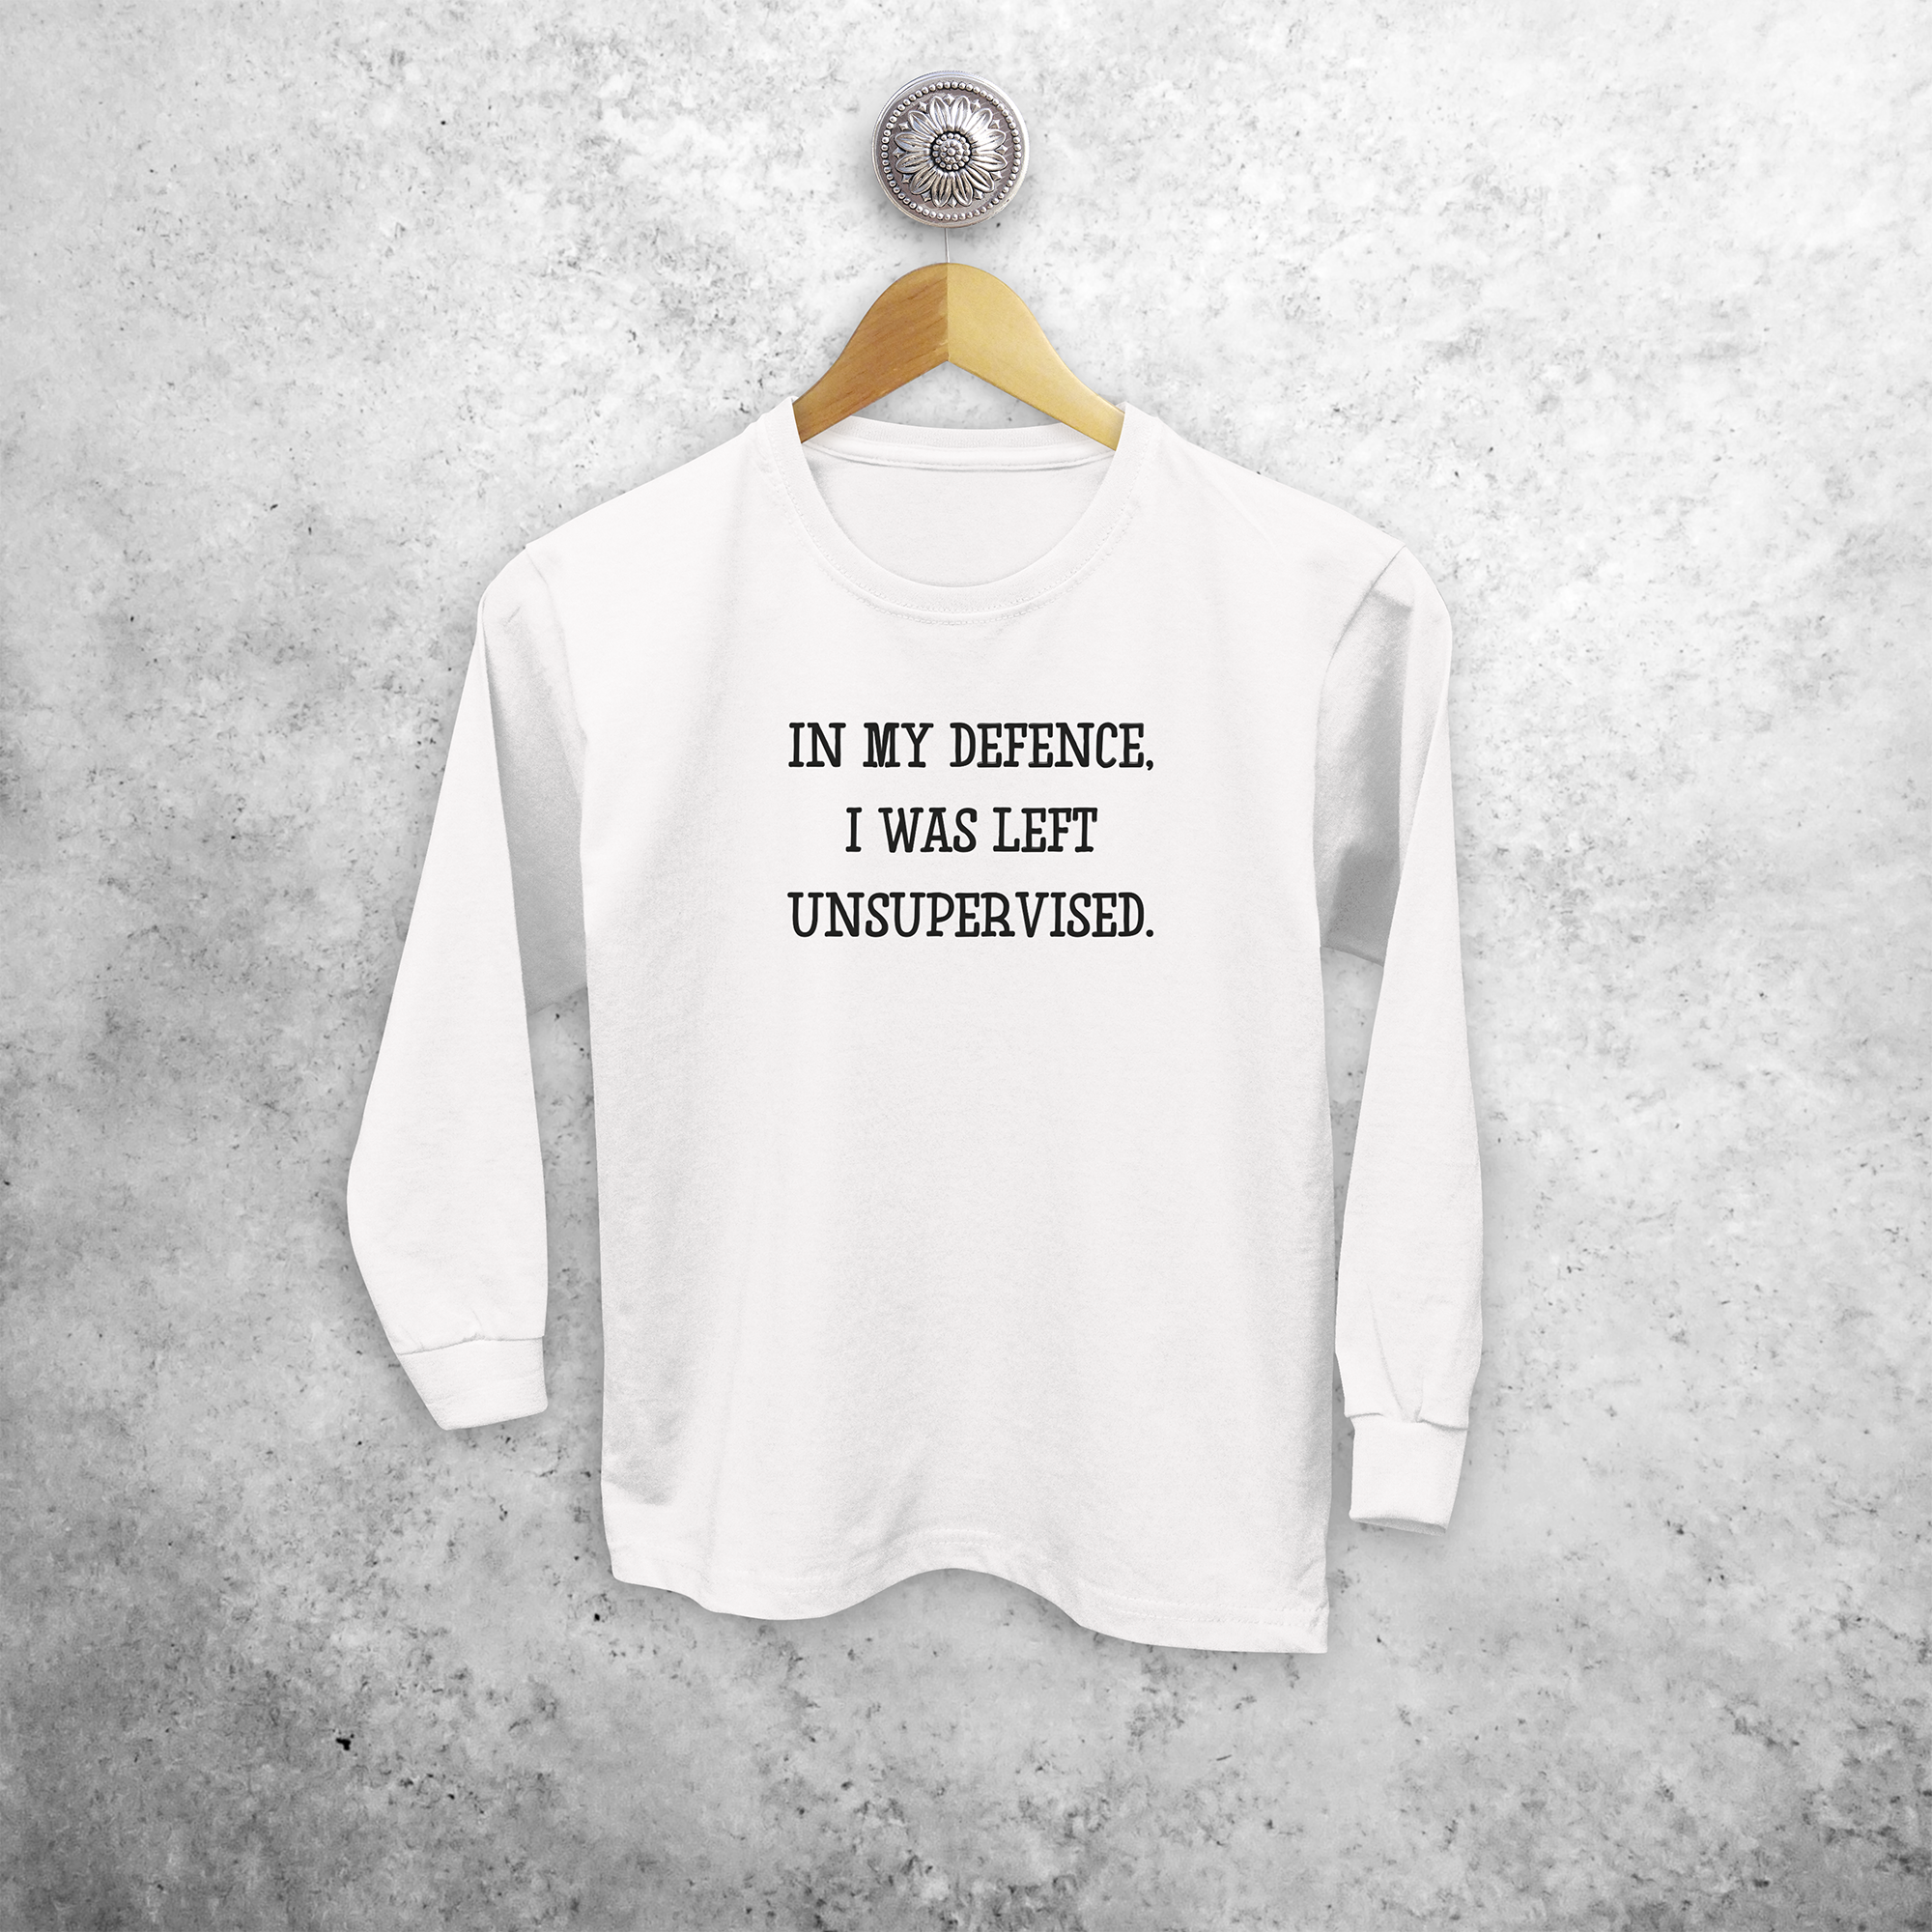 'In my defence, I was left unsupervised' kids longsleeve shirt